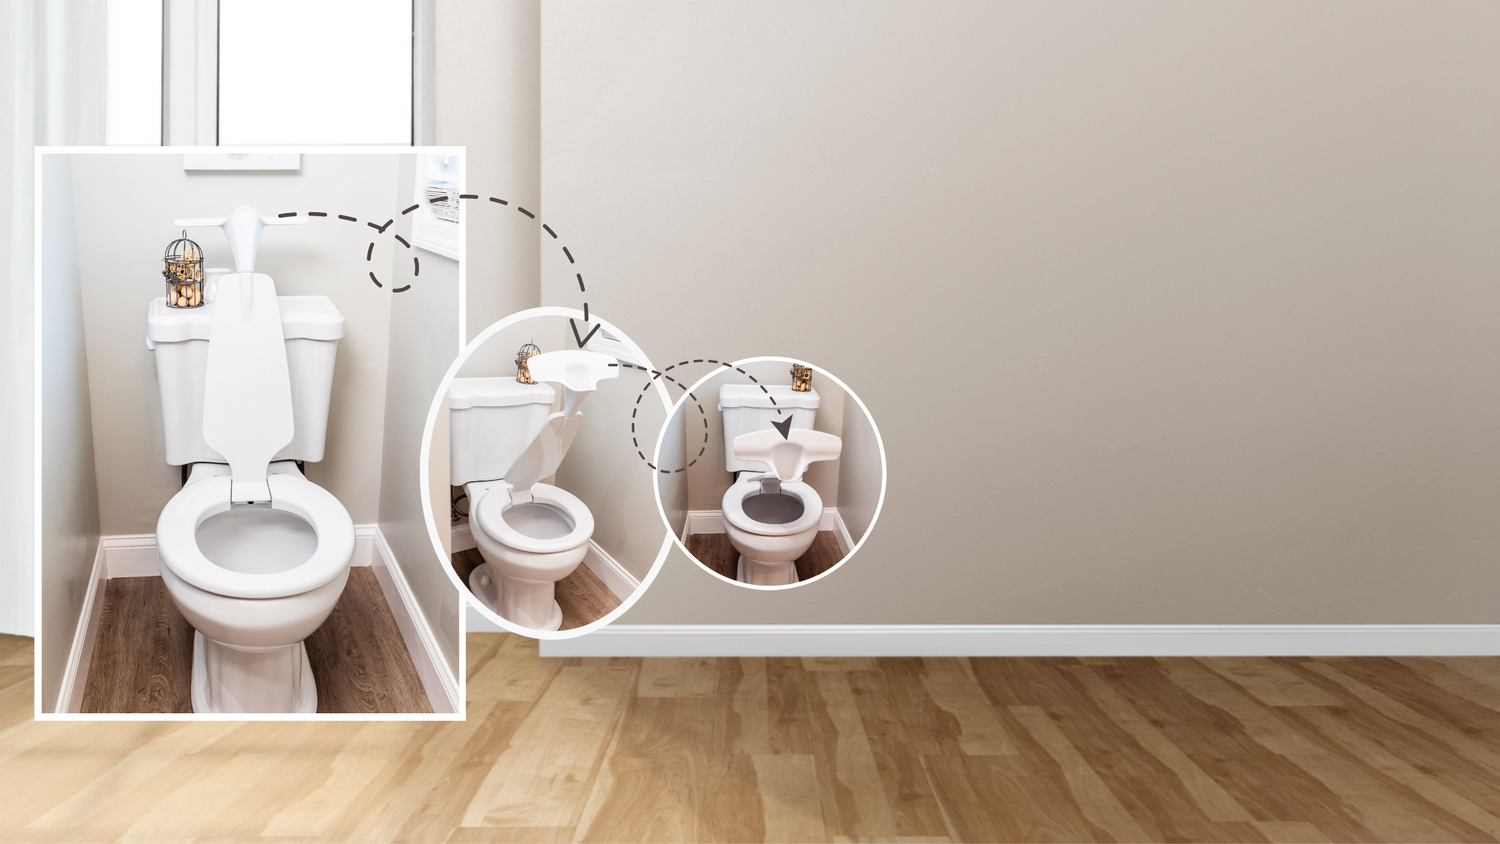 True Toilet: The Ultimate Solution for Clean and Odor-Free Bathrooms